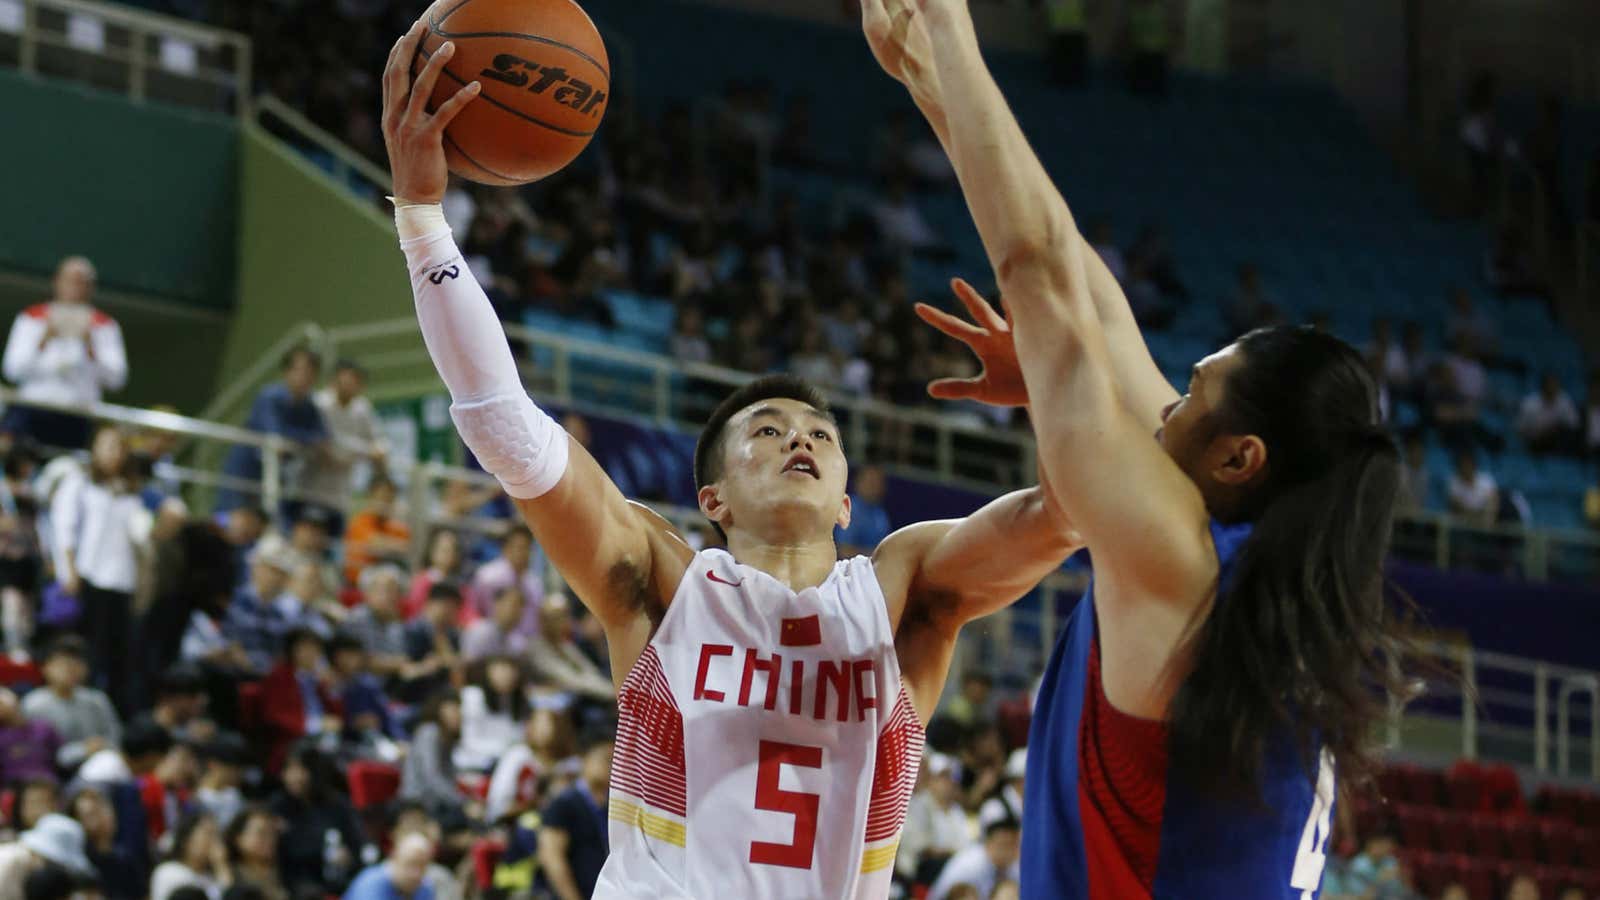 Taiwan’s Tseng Wen Ting, right, tries to block a shot by China’s Guo Ailun during the men’s preliminary round basketball match at the 2014 Asian Games in Incheon, South Korea,